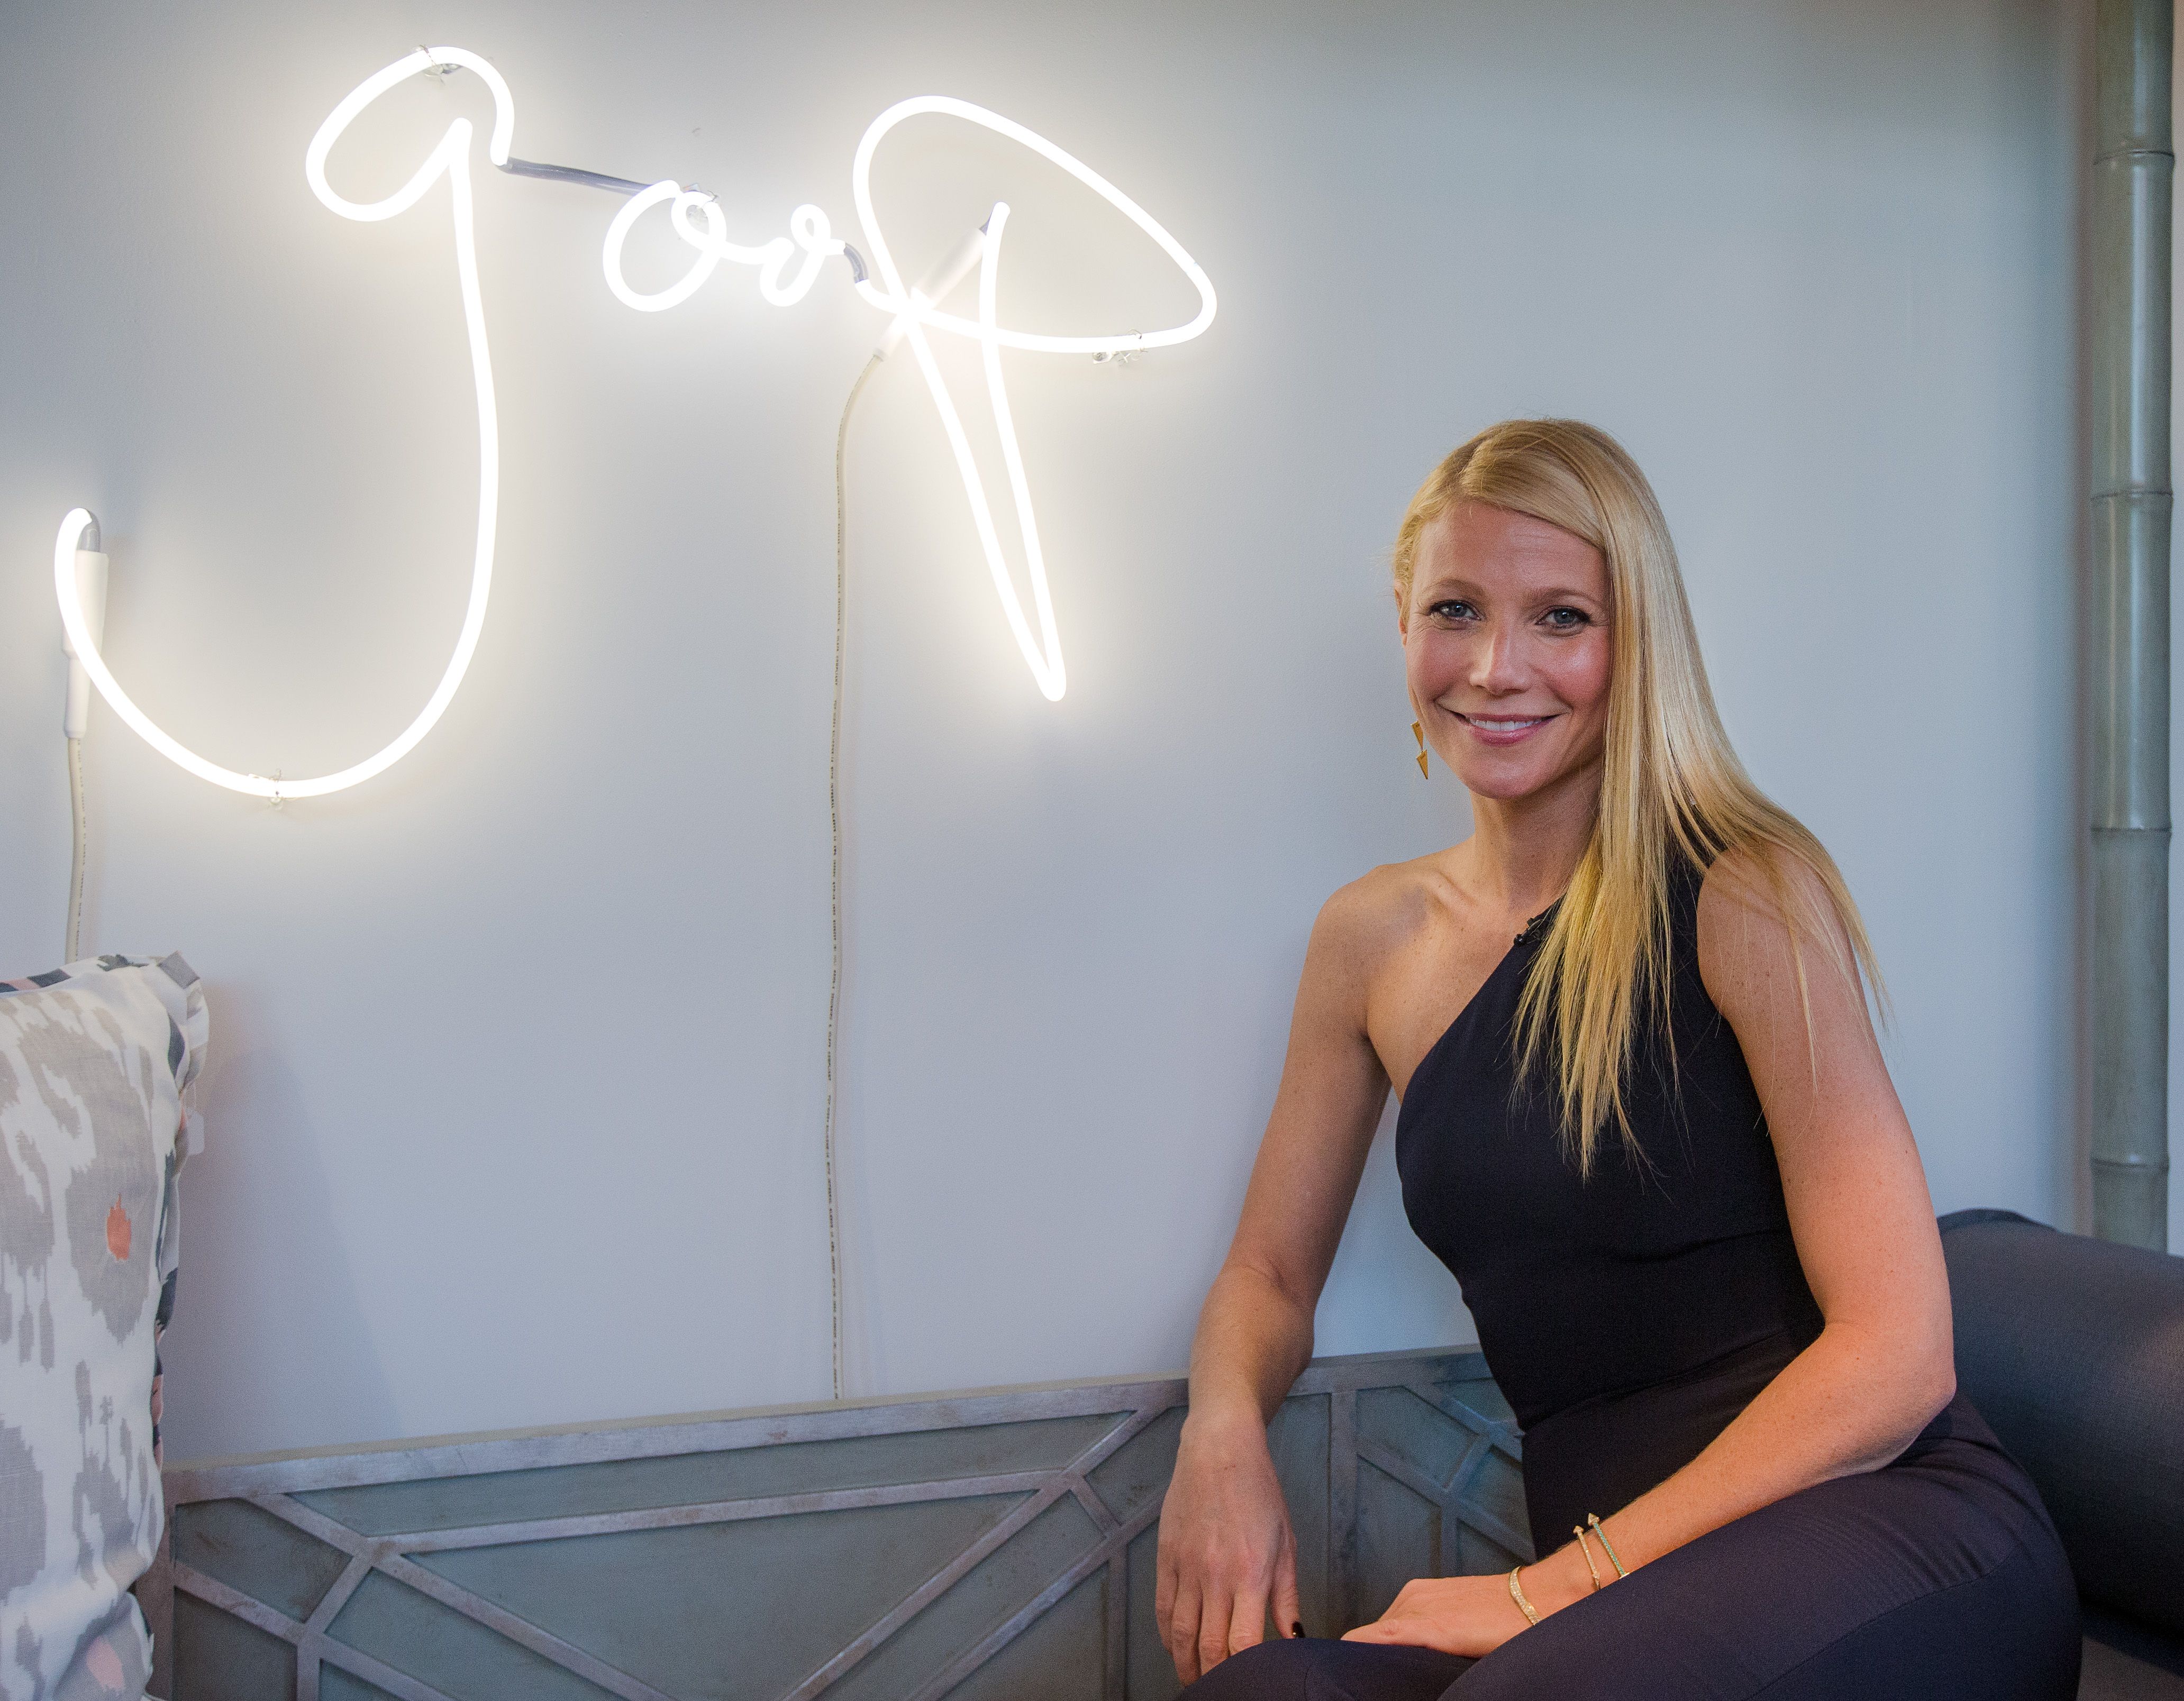 Gwyneth Paltrows lifestyle website Goop reveal home-made lube and gold dildos pic